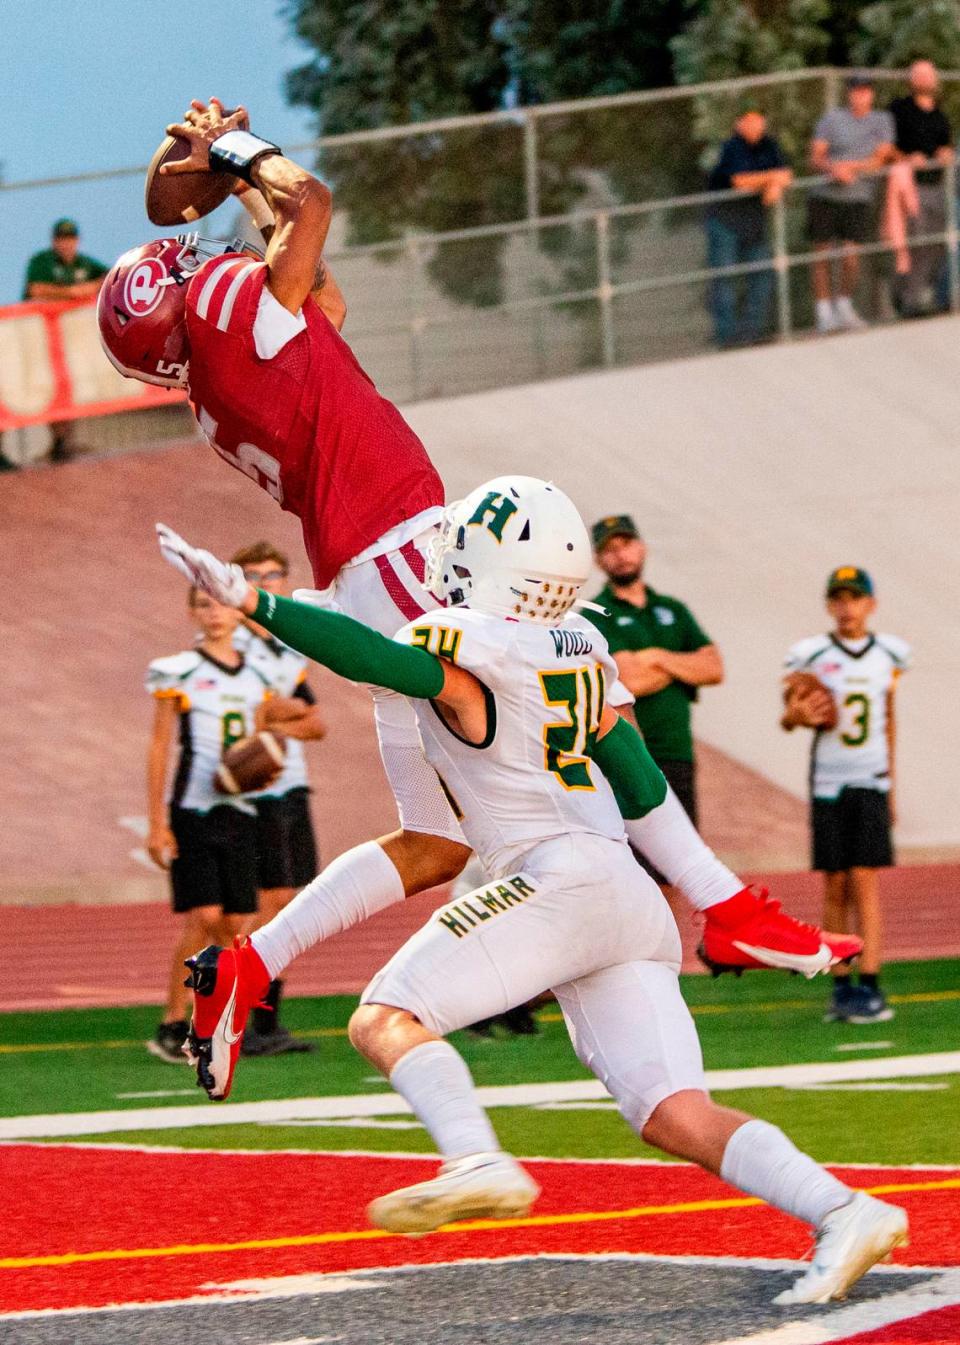 Dj Hardin, 5, of Patterson makes a touchdown catch in the end zone as Caden Wood, 24, of Hilmar defends.